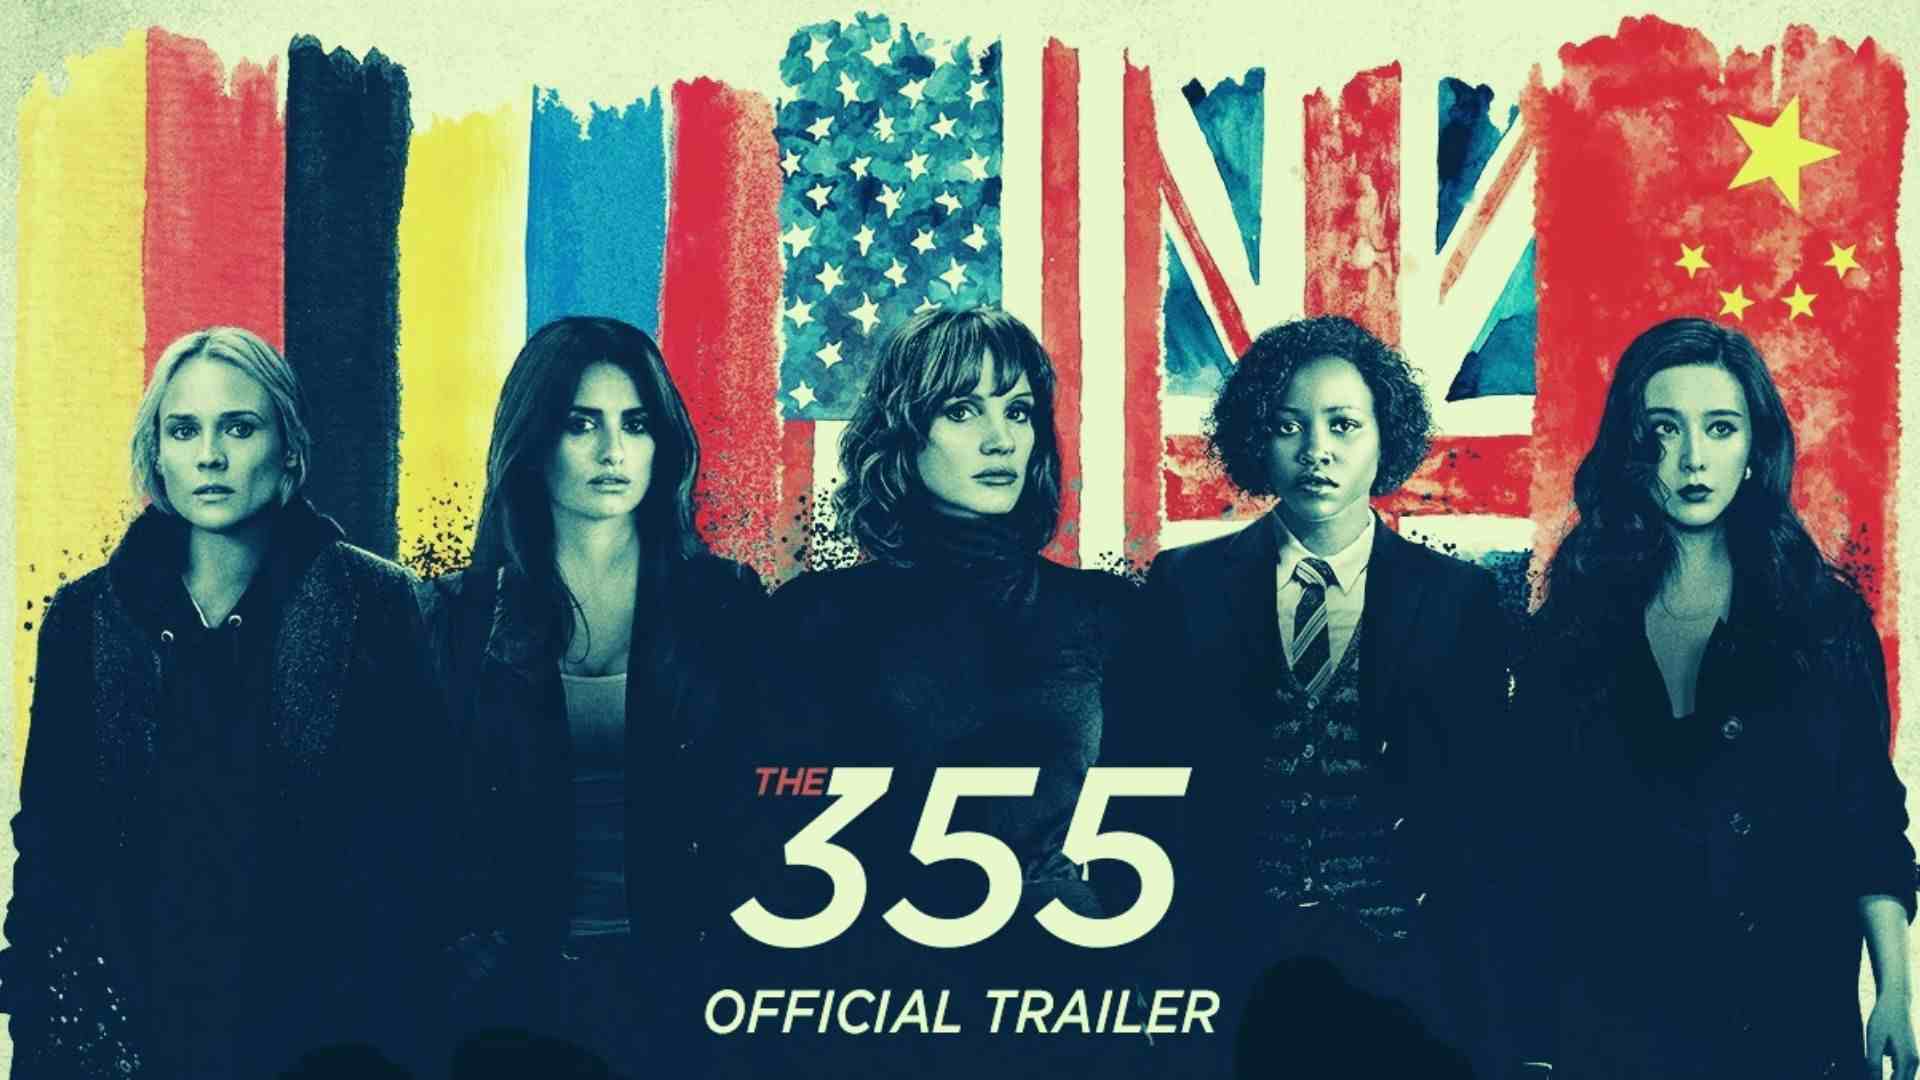 The 355: All the latest info box about the Upcoming movie